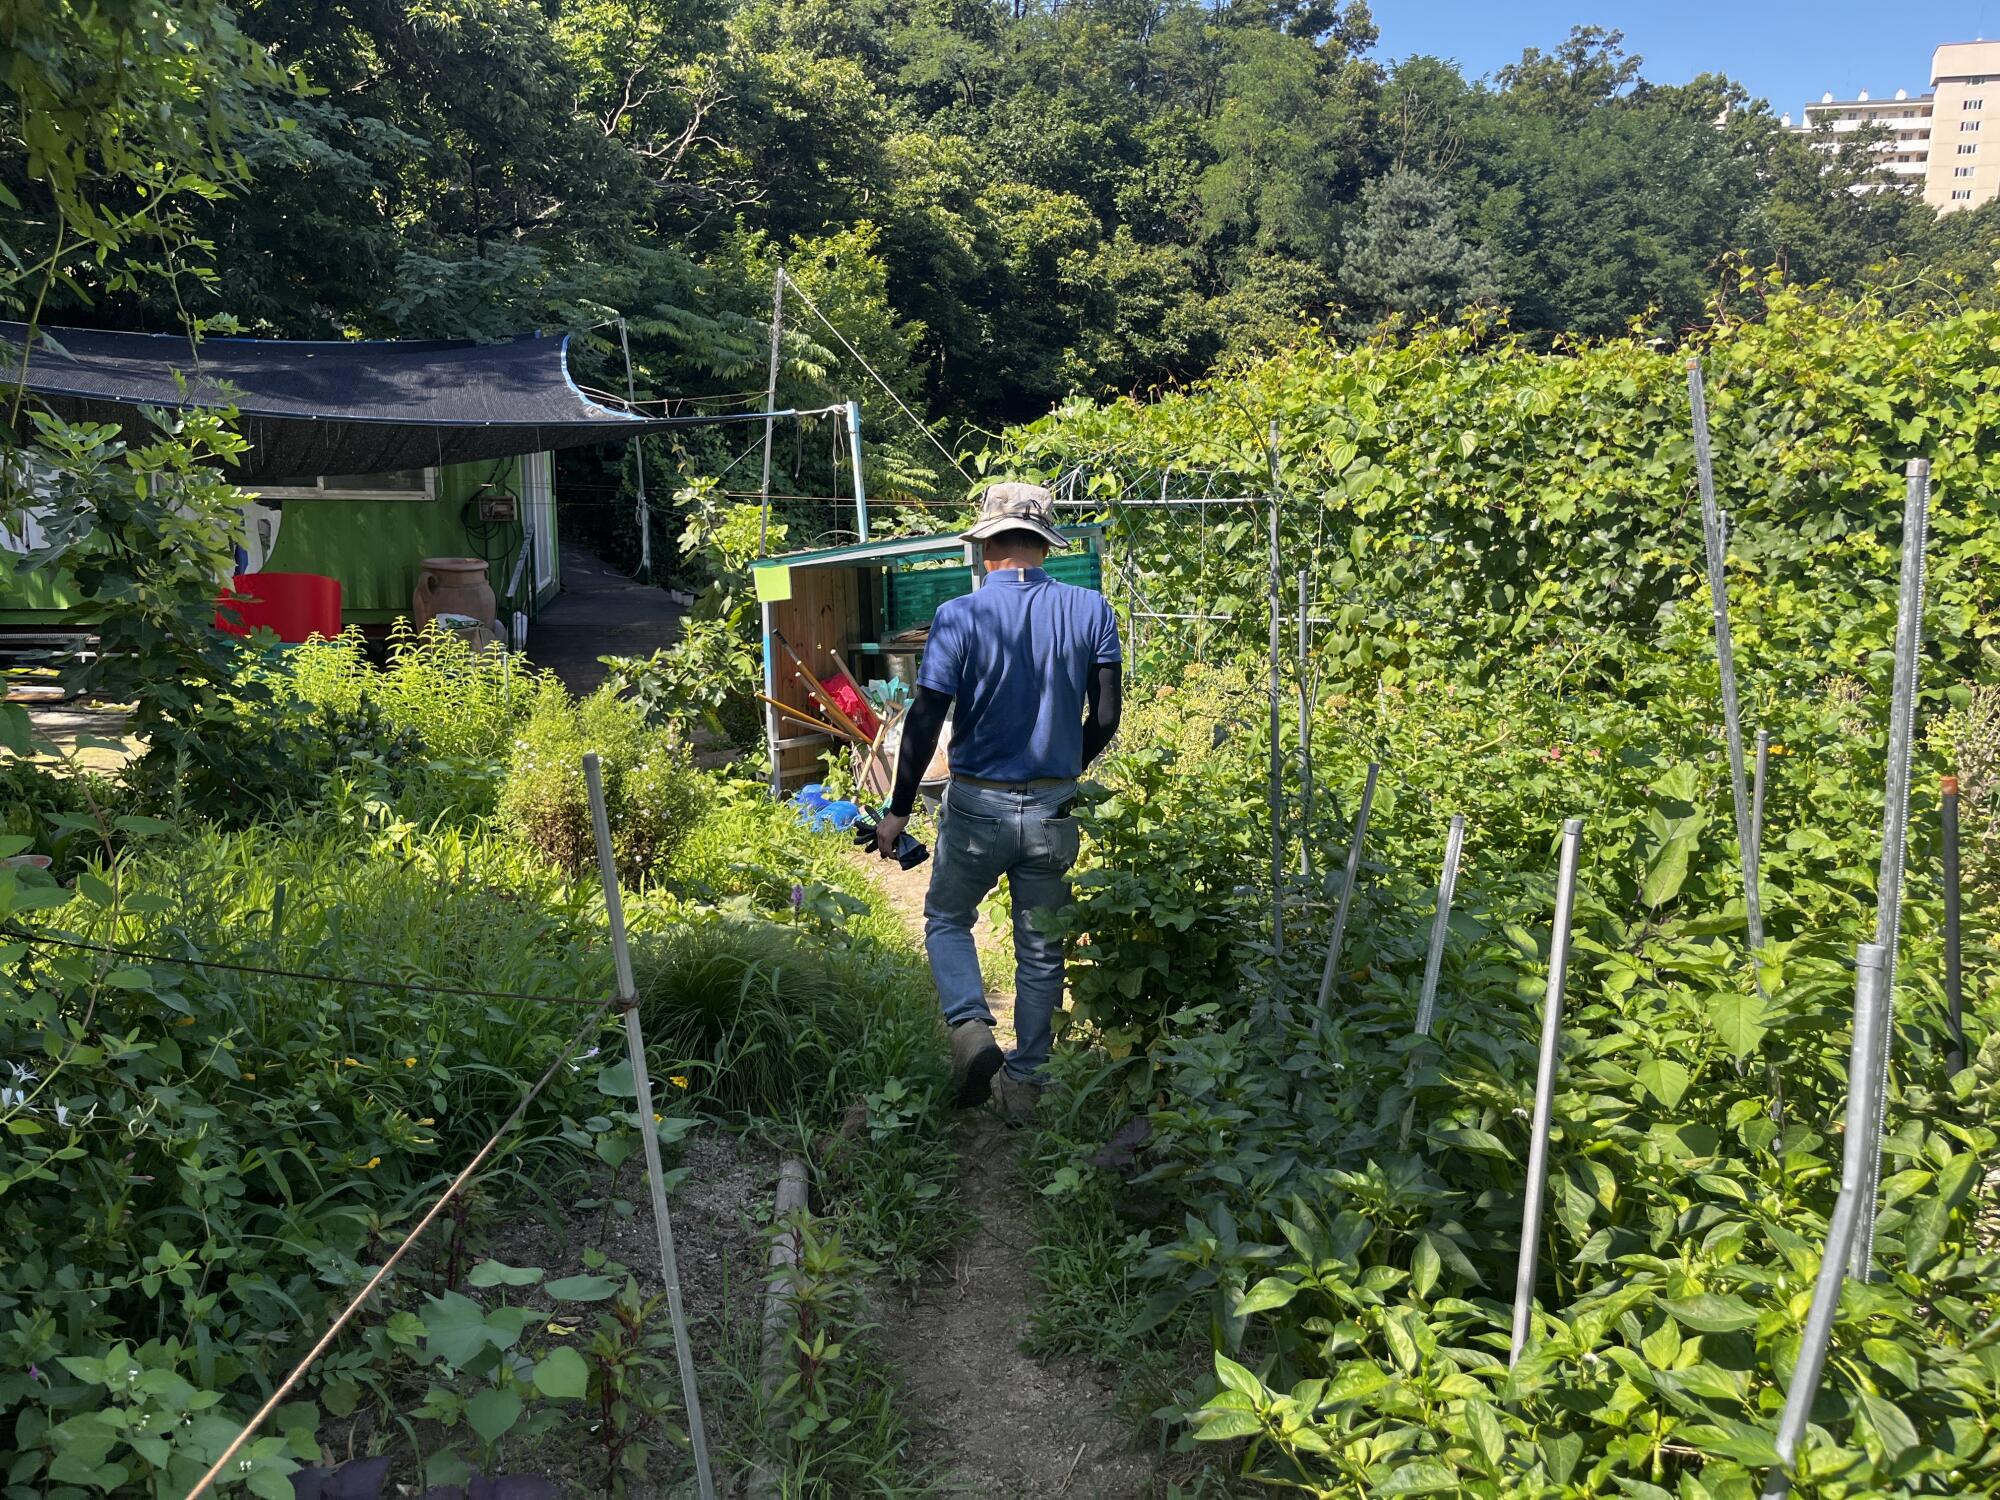 A man in a hat walks on a small dirt path between rows of plants